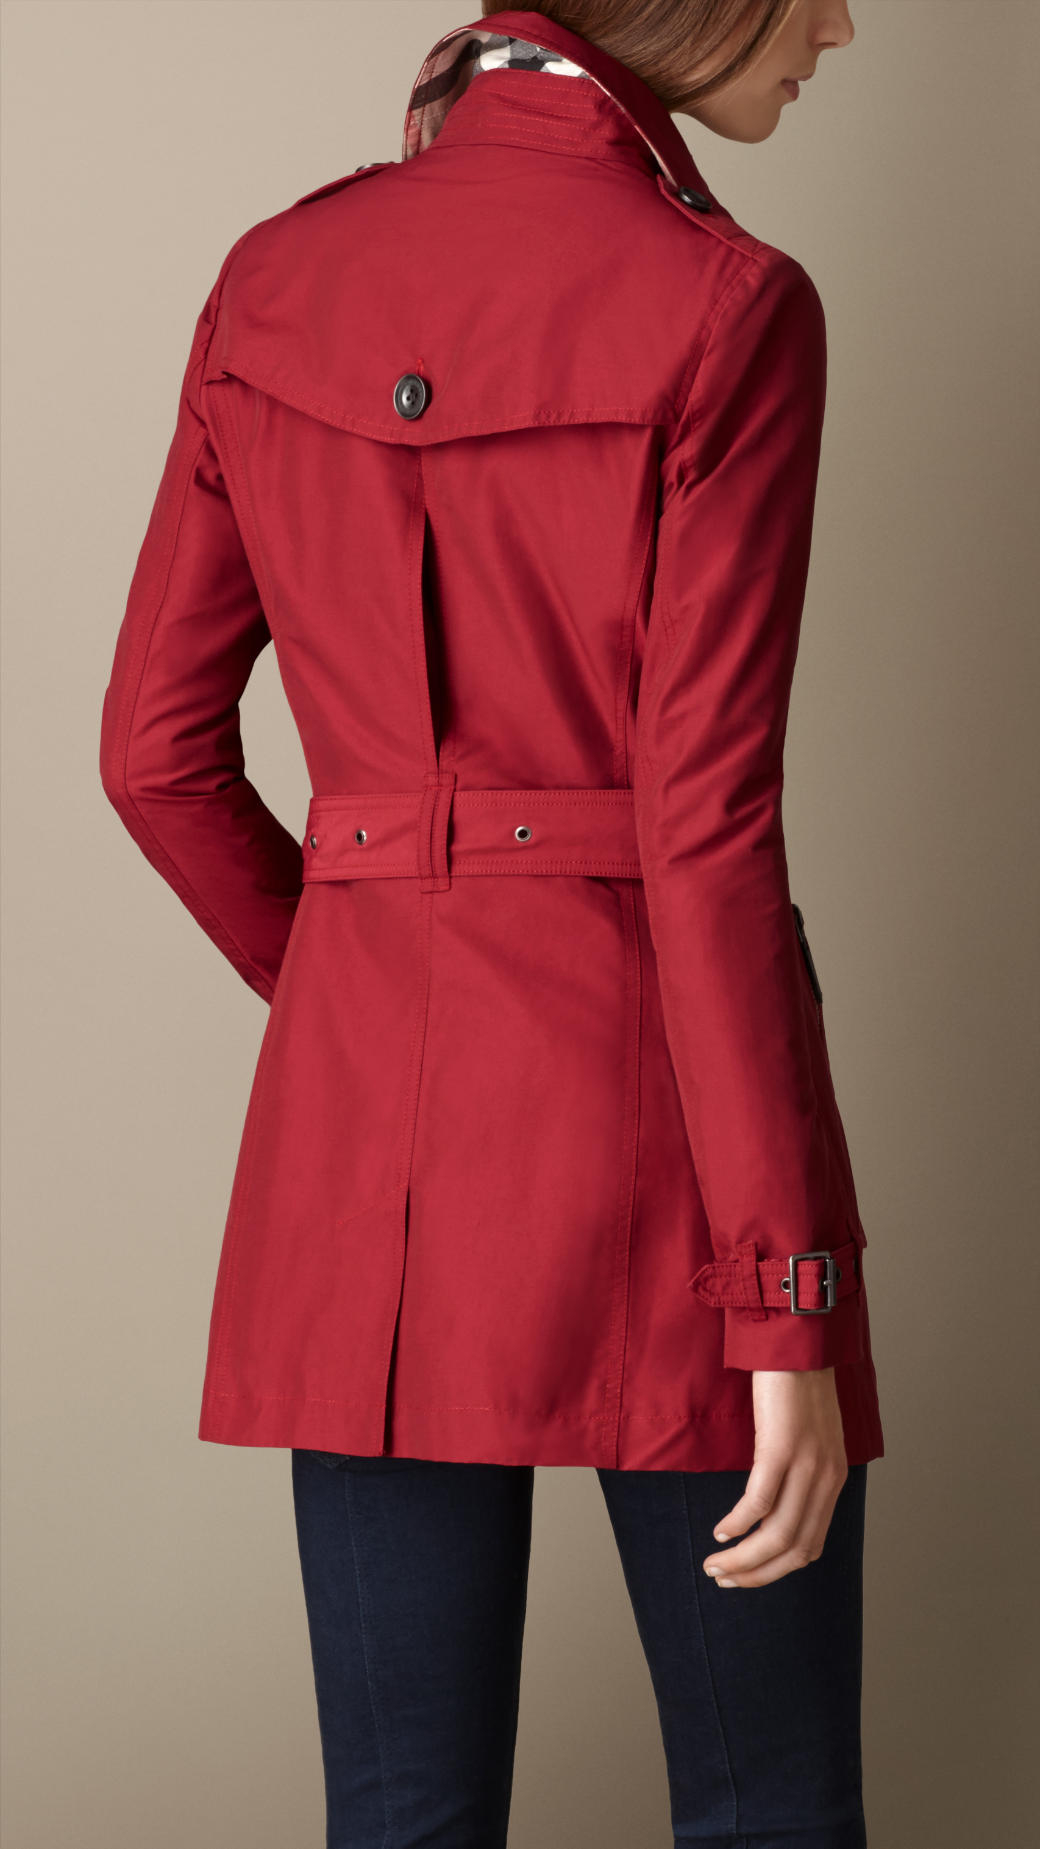 burberry short double wool twill trench coat